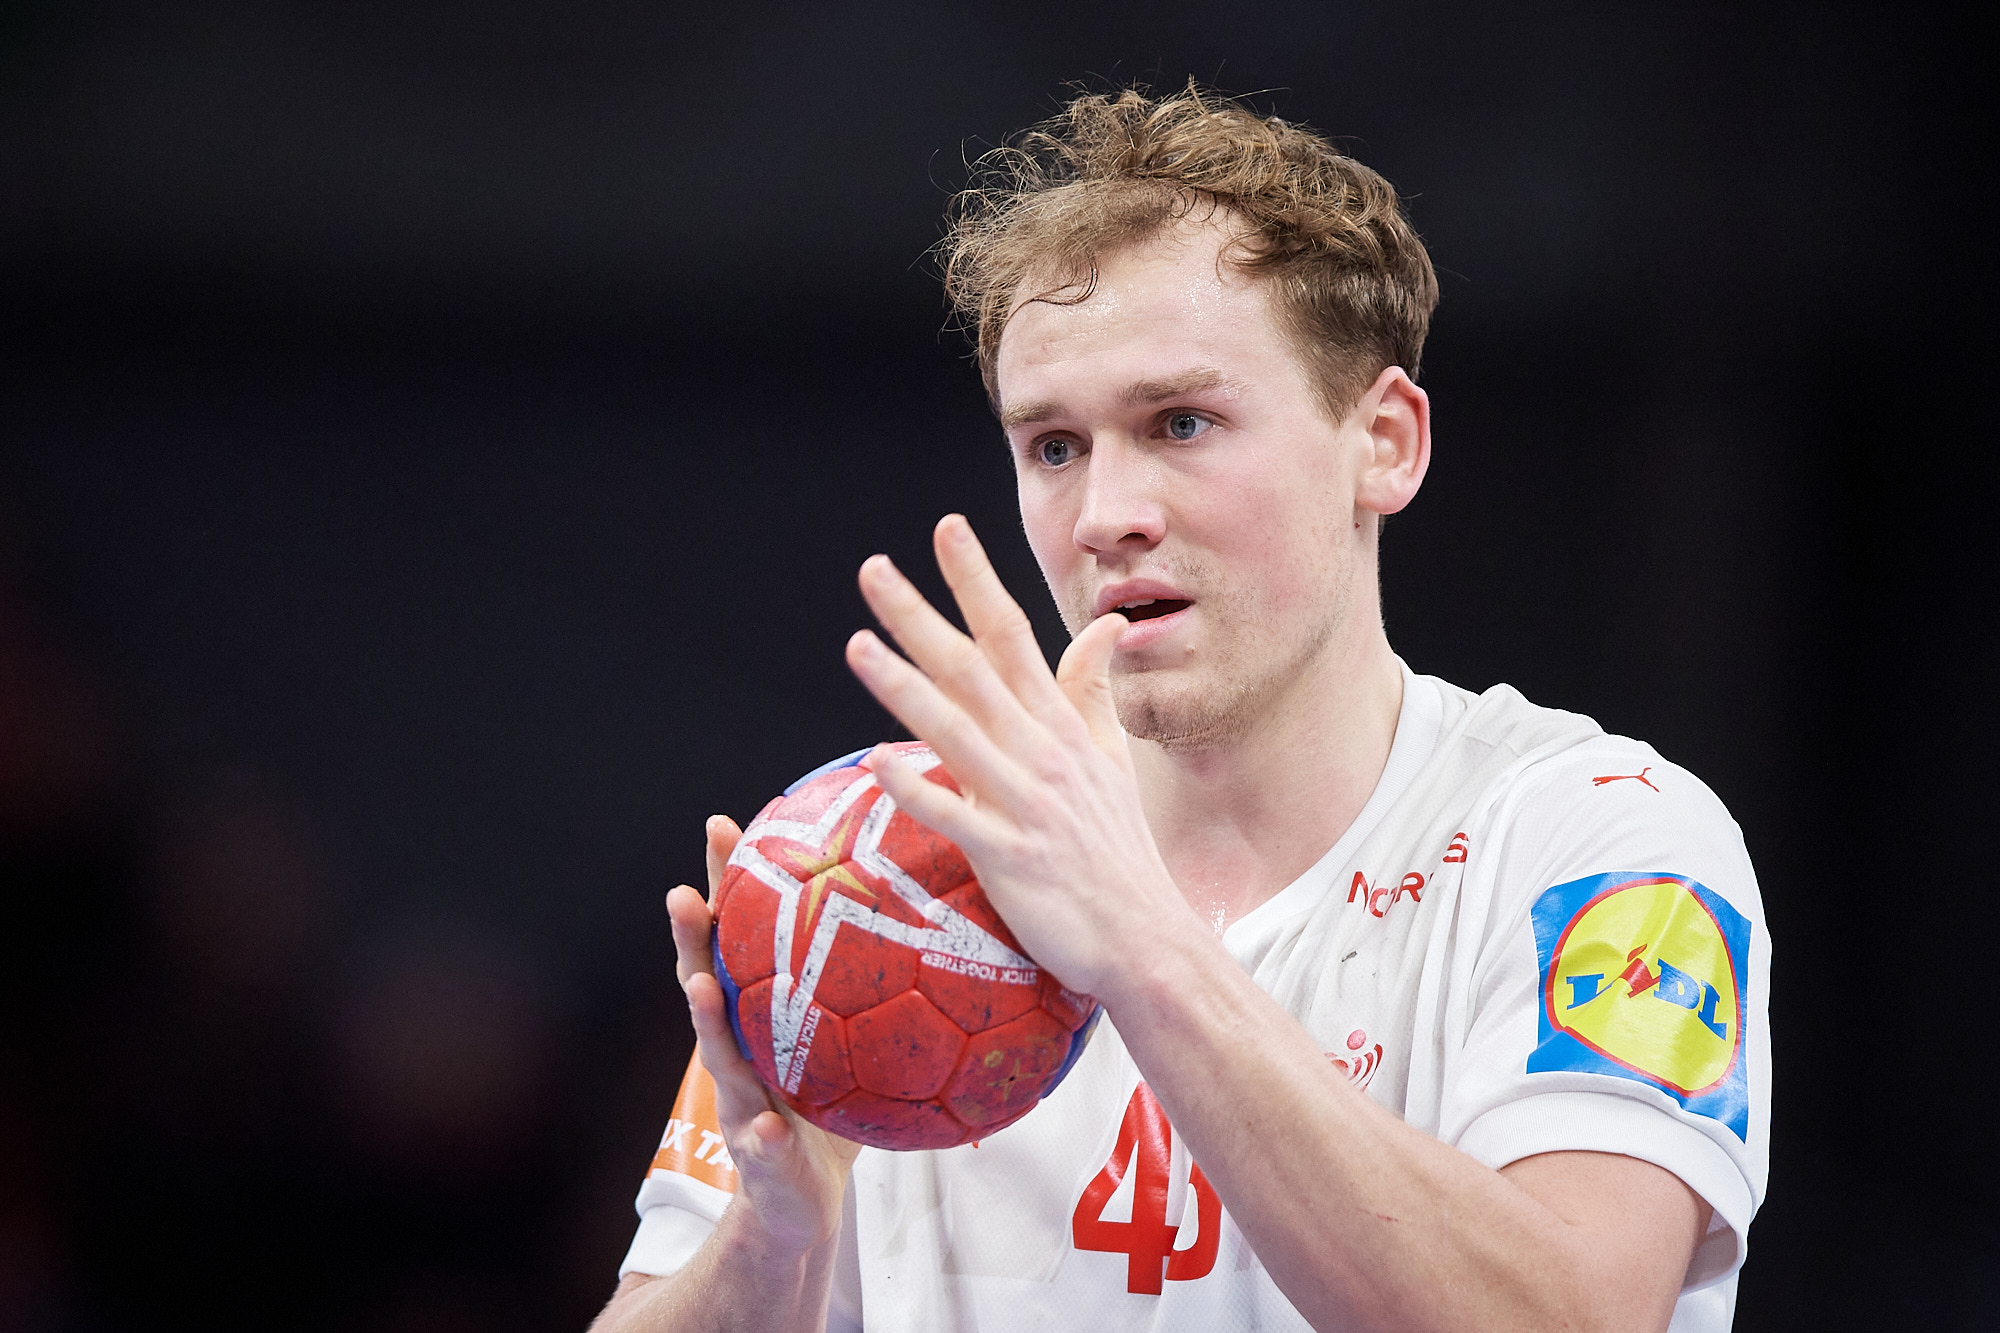 2023 Handball World Championship in Poland and Sweden: Power rankings and  predictions